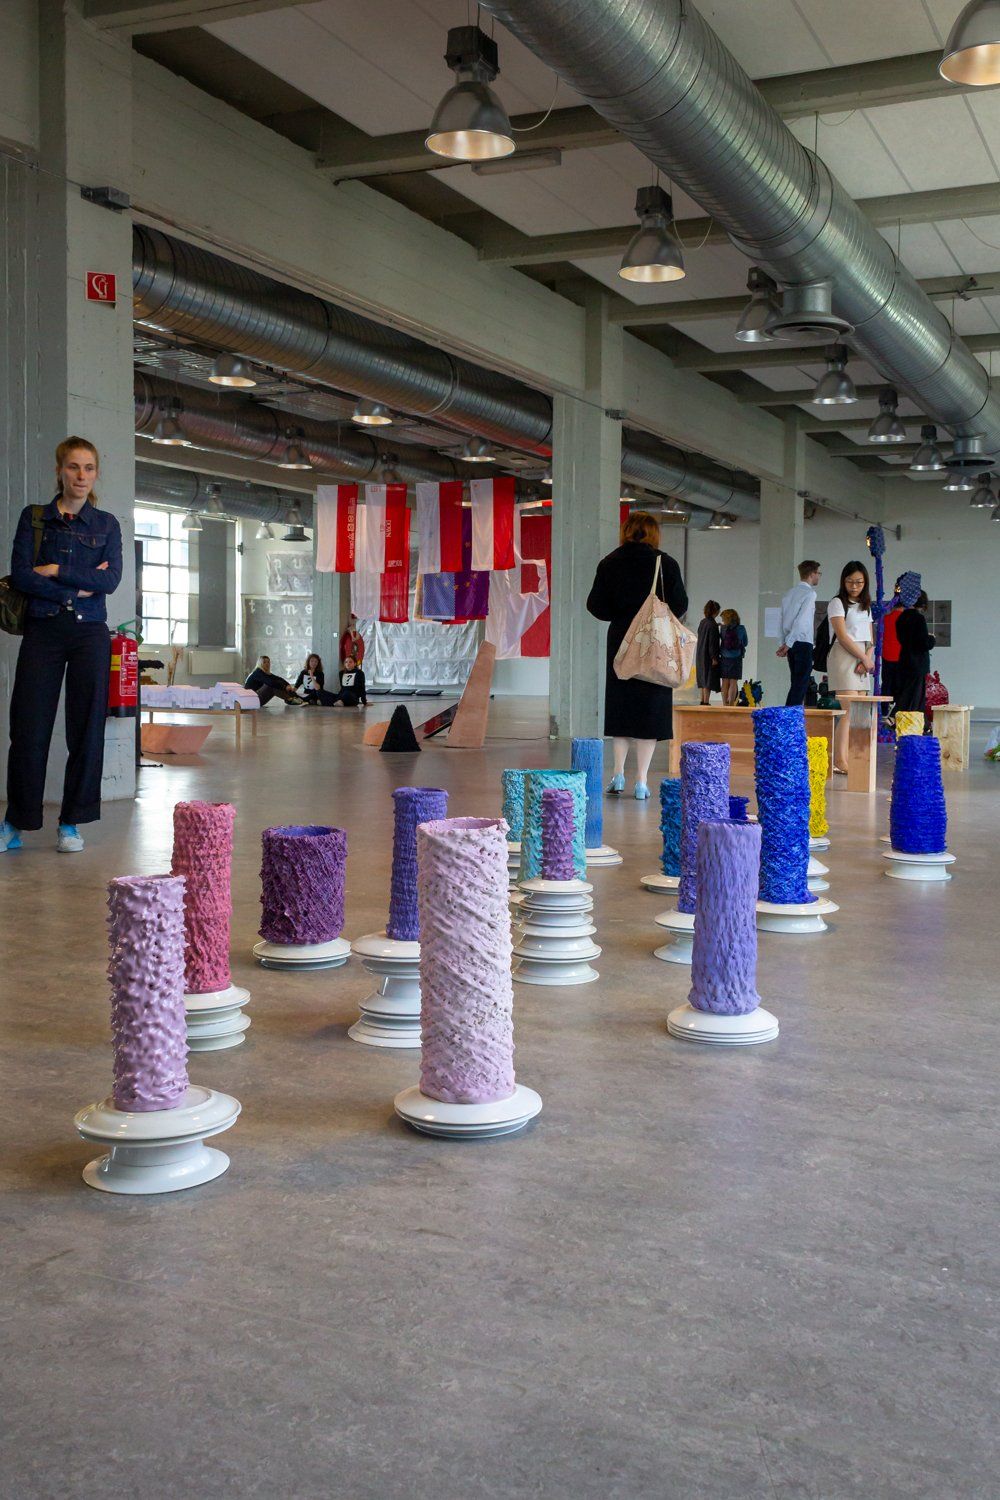 I was at the Design Academy Eindhoven 2018 Masters’ Graduation Exhibition – and you were not